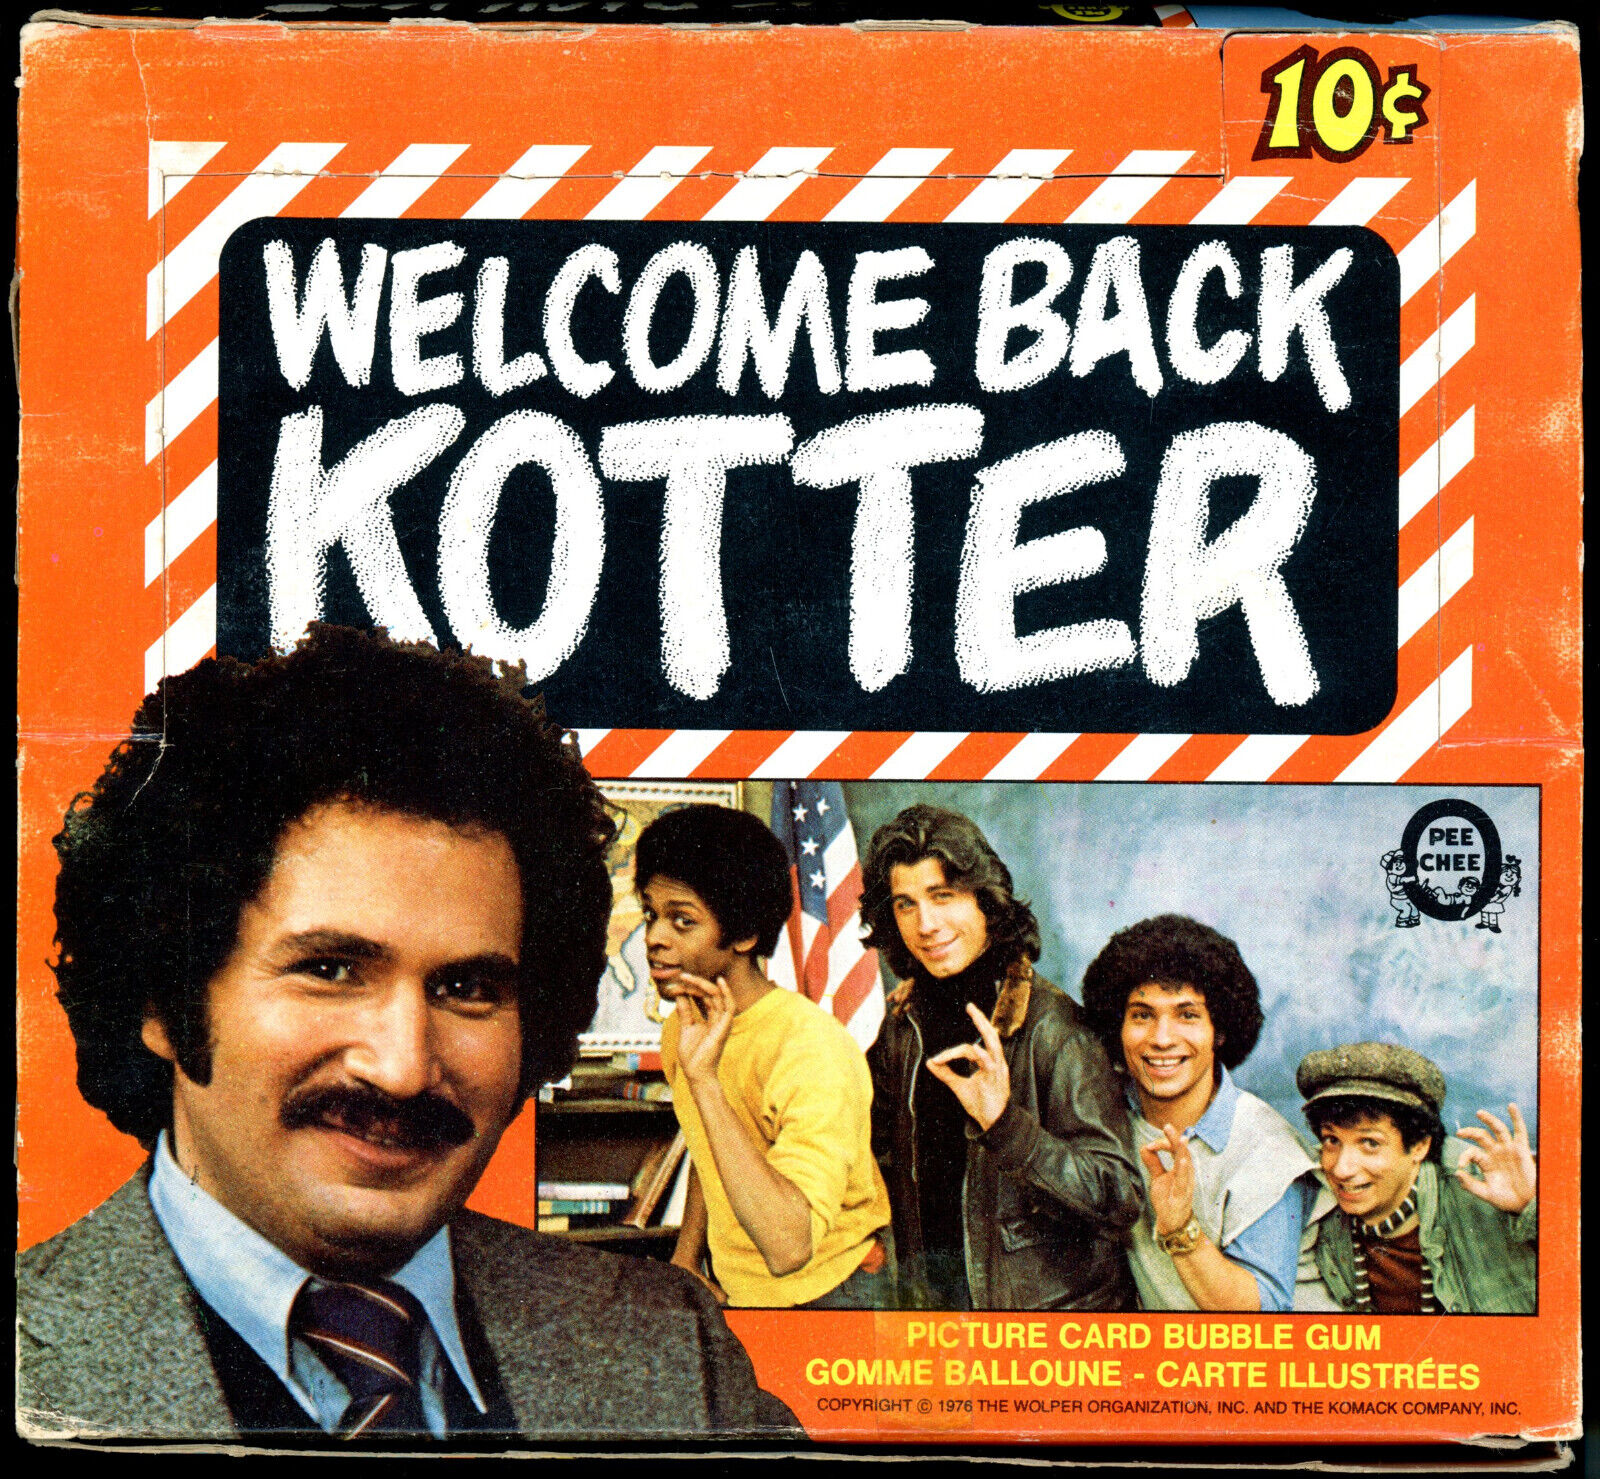 1976 TOPPS OPC O-PEE-CHEE WELCOME BACK KOTTER Travolta unopened 36 pack Wax Box